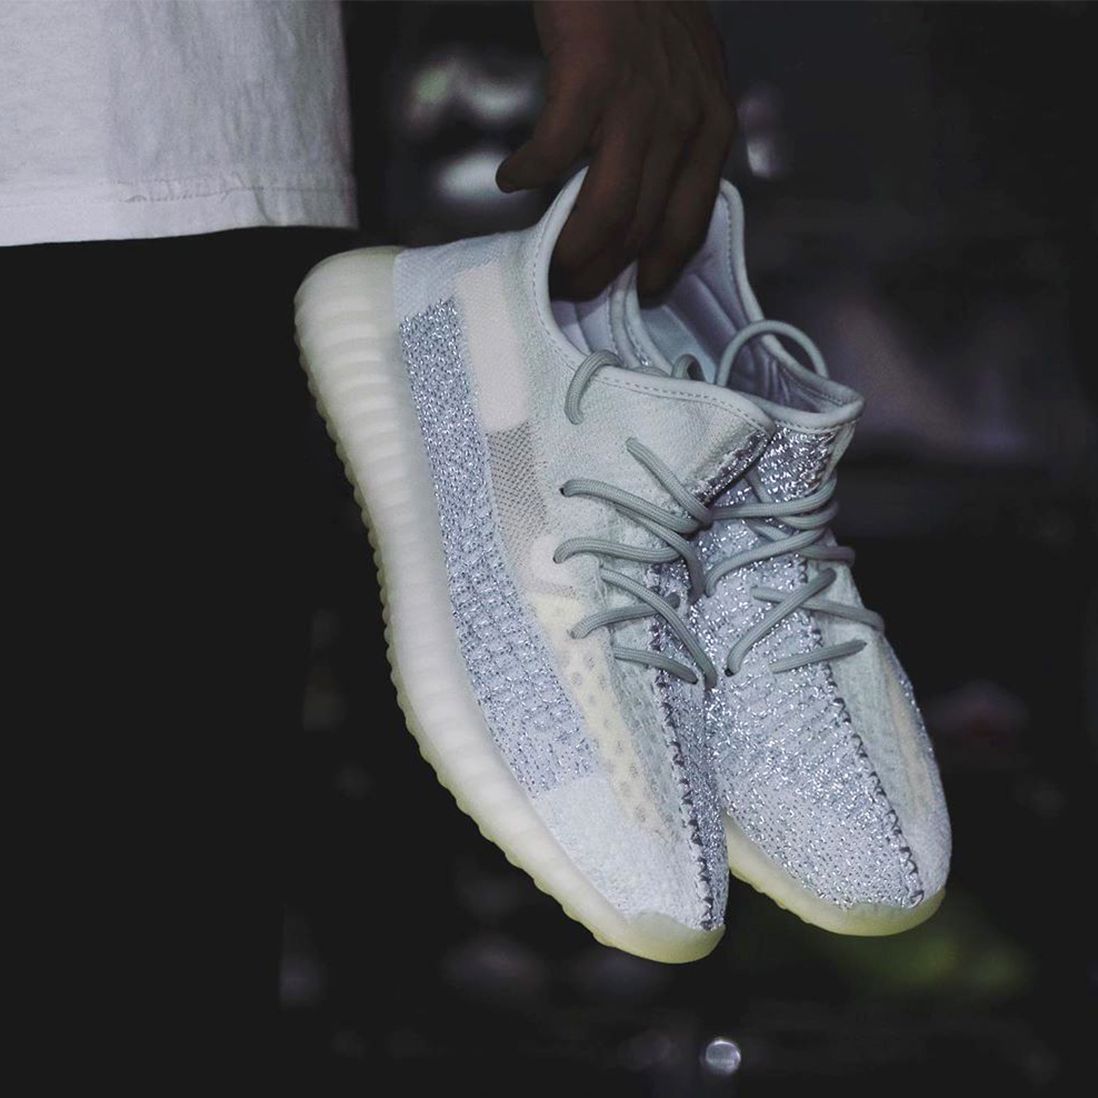 Detailed Looks at the adidas YEEZY BOOST 350 v2 “Cloud White